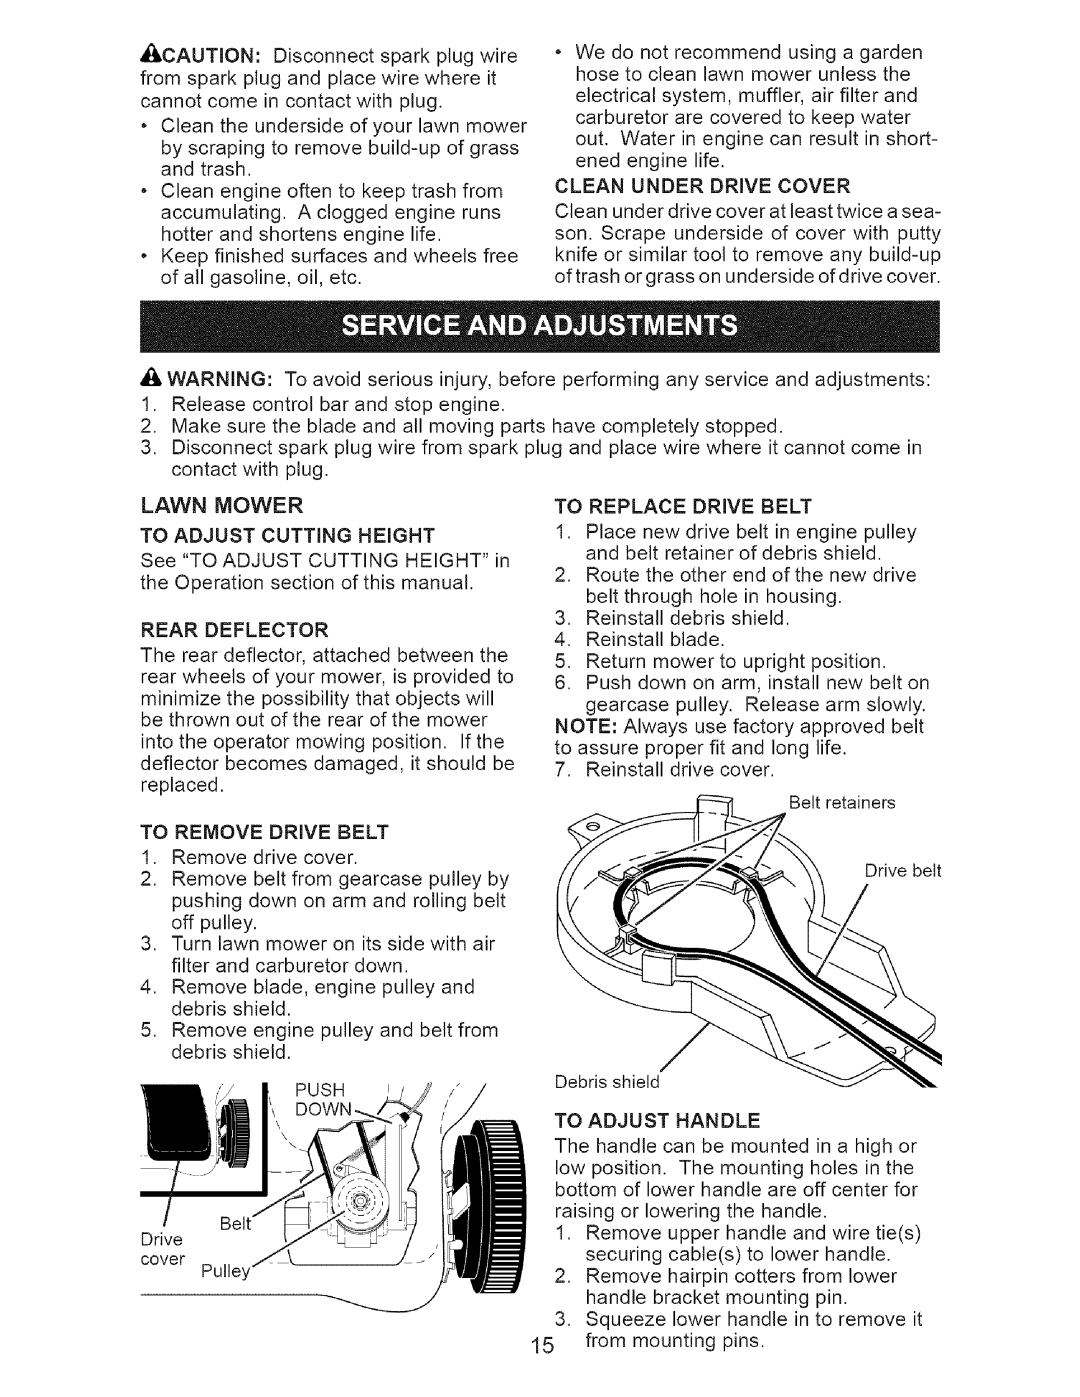 Craftsman 917.376674 owner manual Lawn Mower To Adjust Cutting Height 